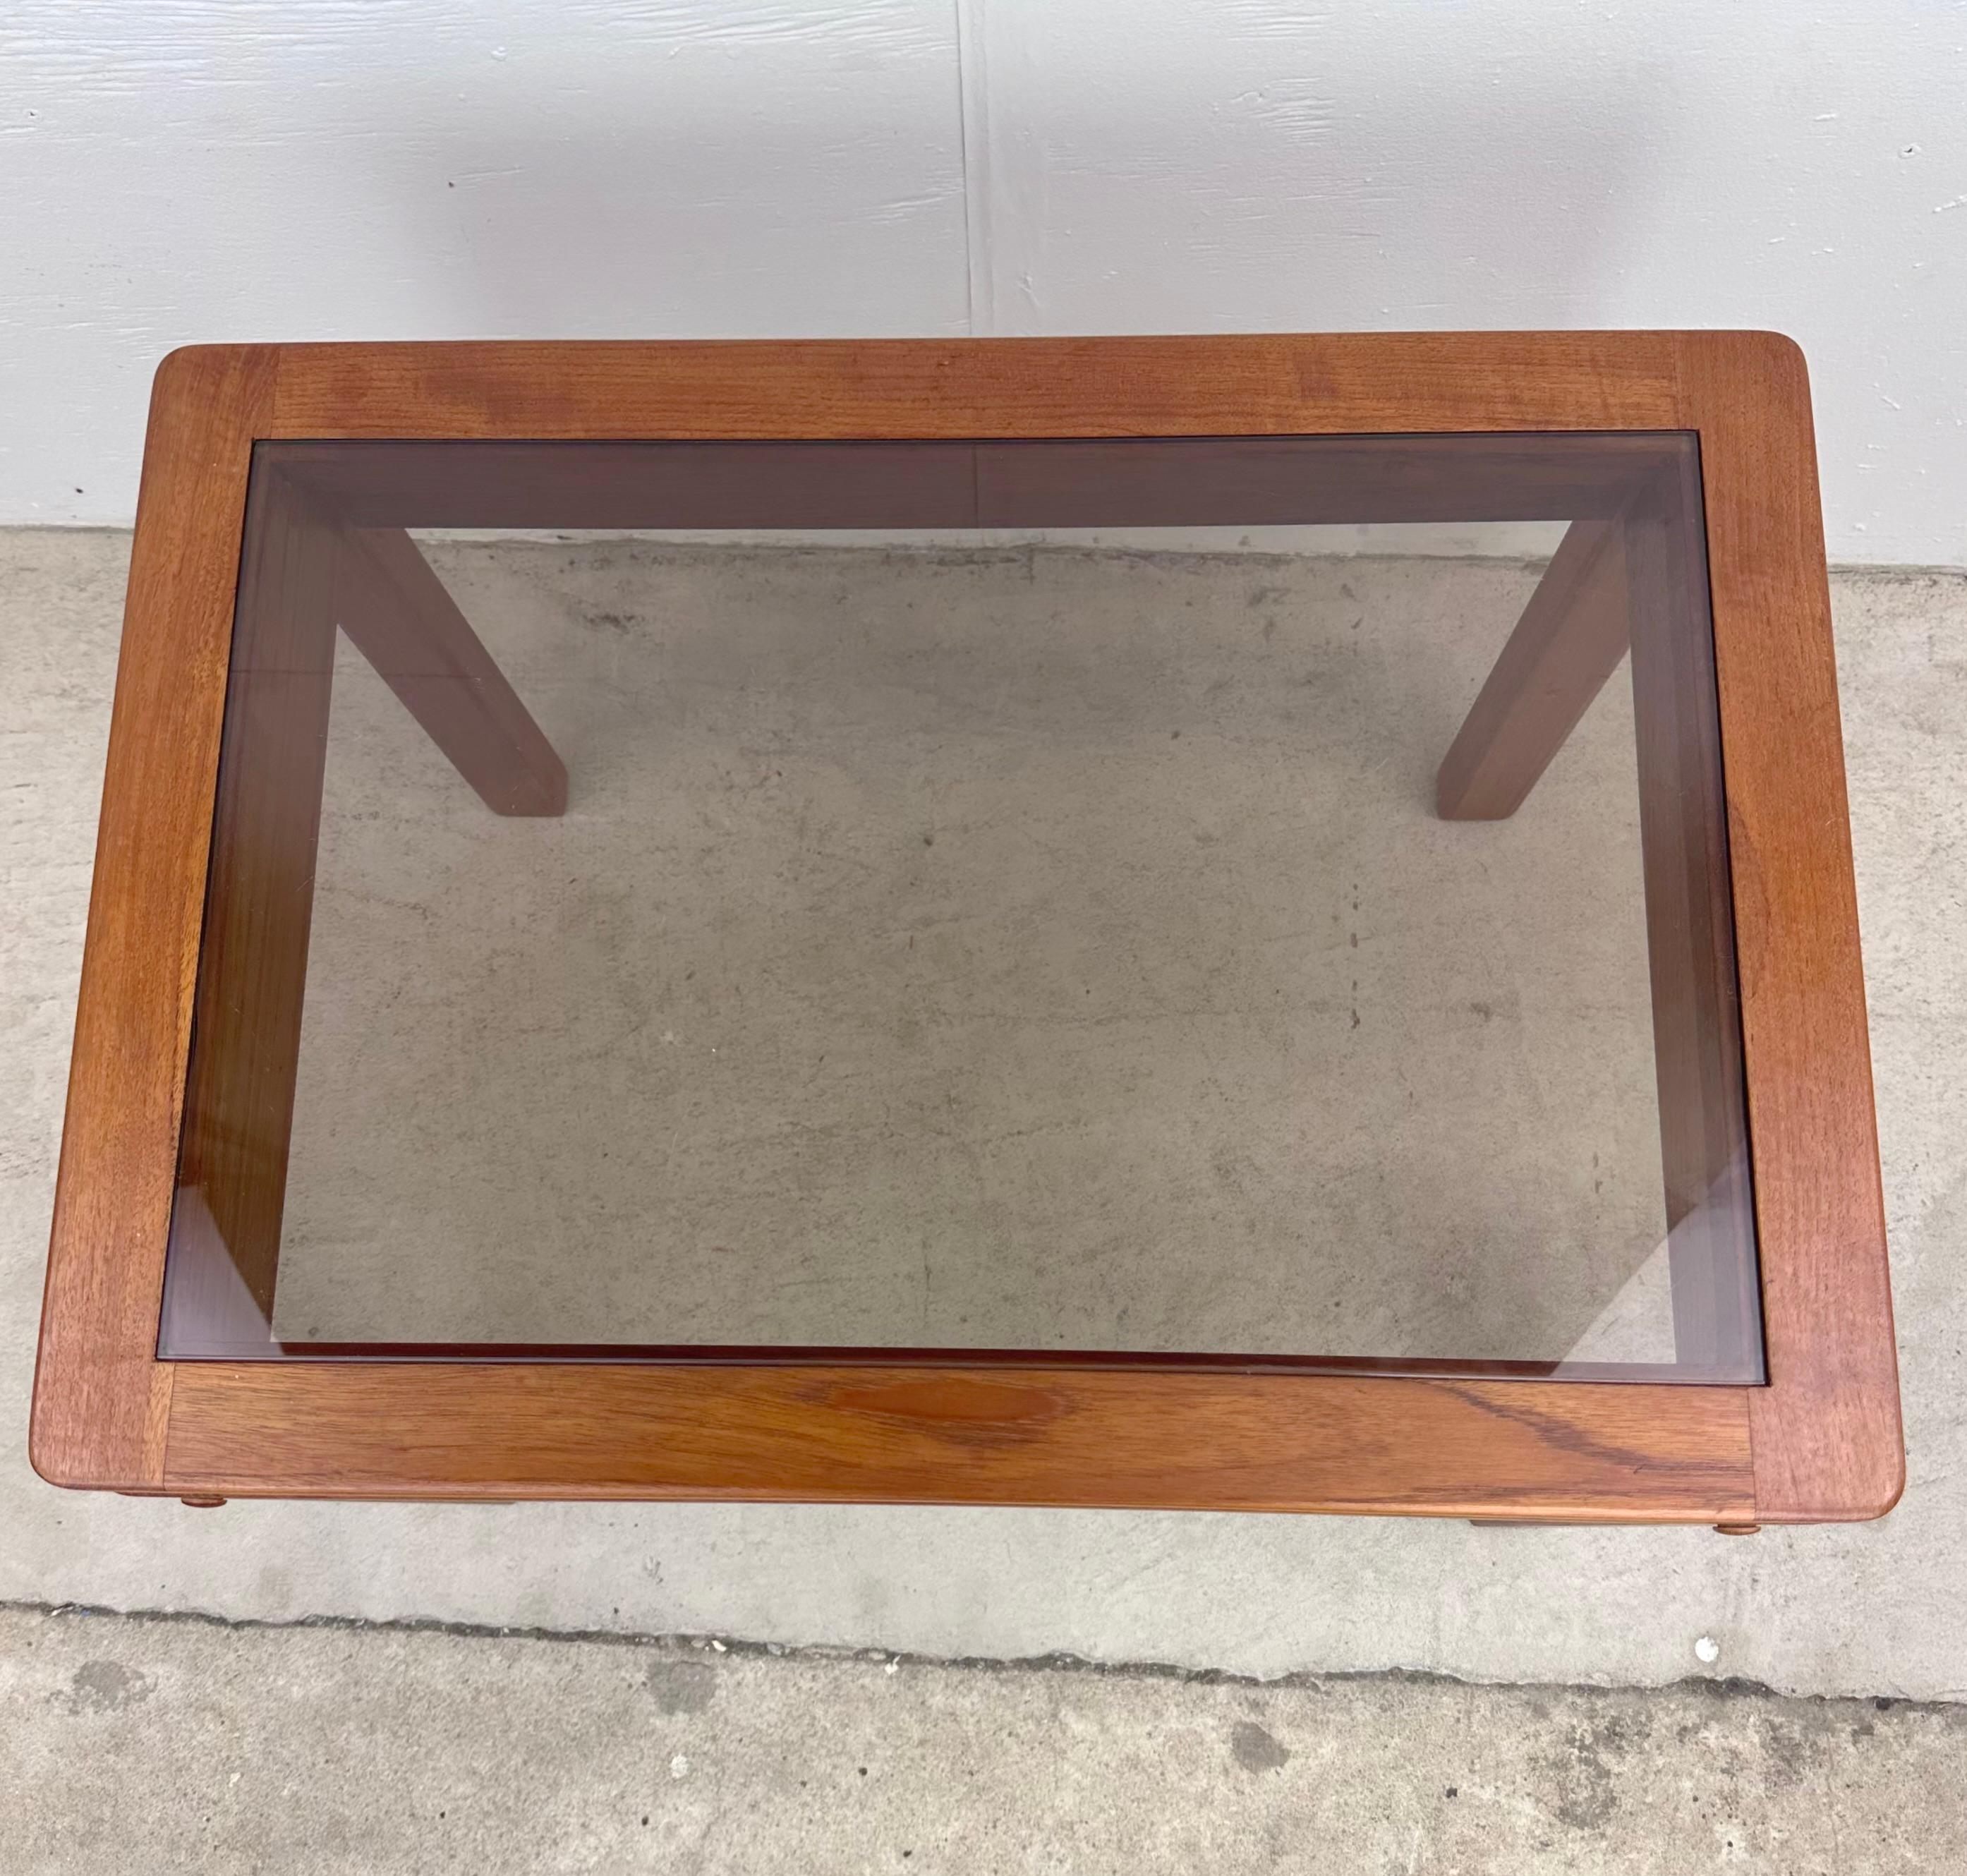 This Mid-Century Modern Teak End Table with smoked Glass Inset offers a timeless blend of style and function. Looking for an end table that seamlessly combines classic Scandinavian design, functionality, and a touch of mid-century charm? Look no